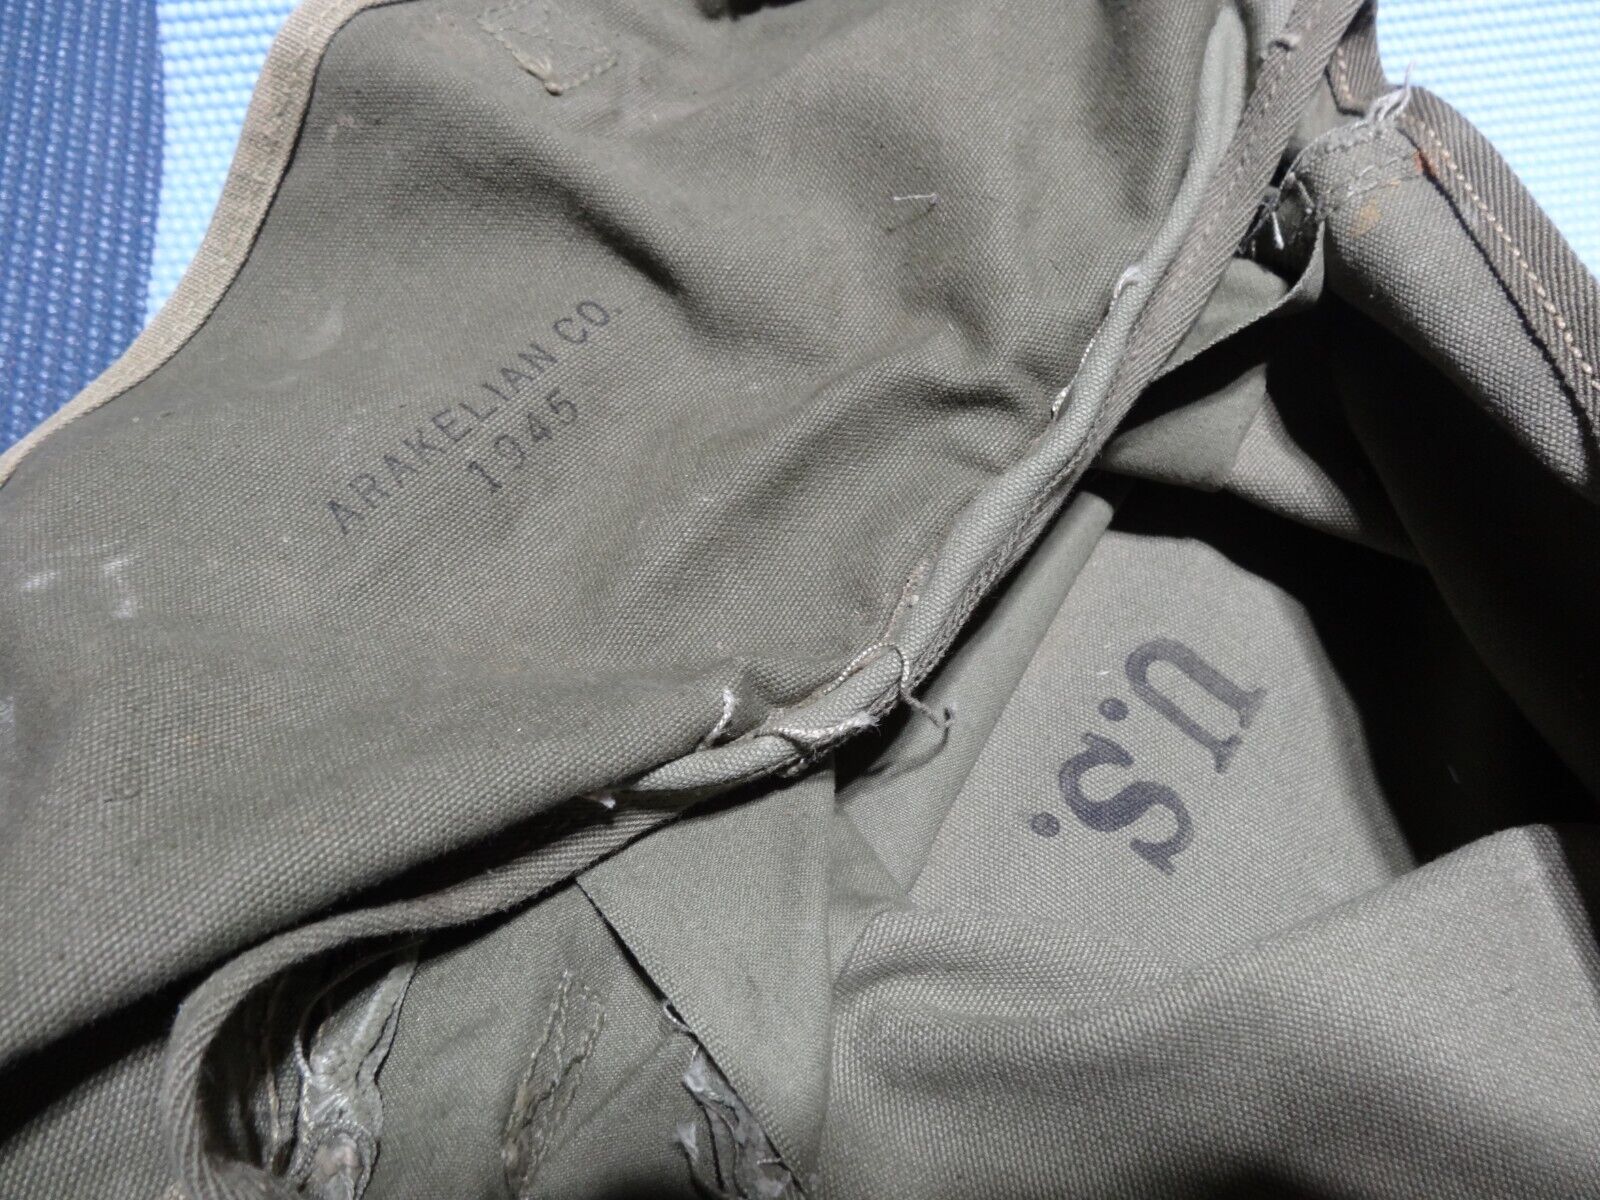 RARE MF\'G ERROR WWII US ARMY ARAKELIAN & CO. 1945 Musette Bag *US* IS INSIDE OUT